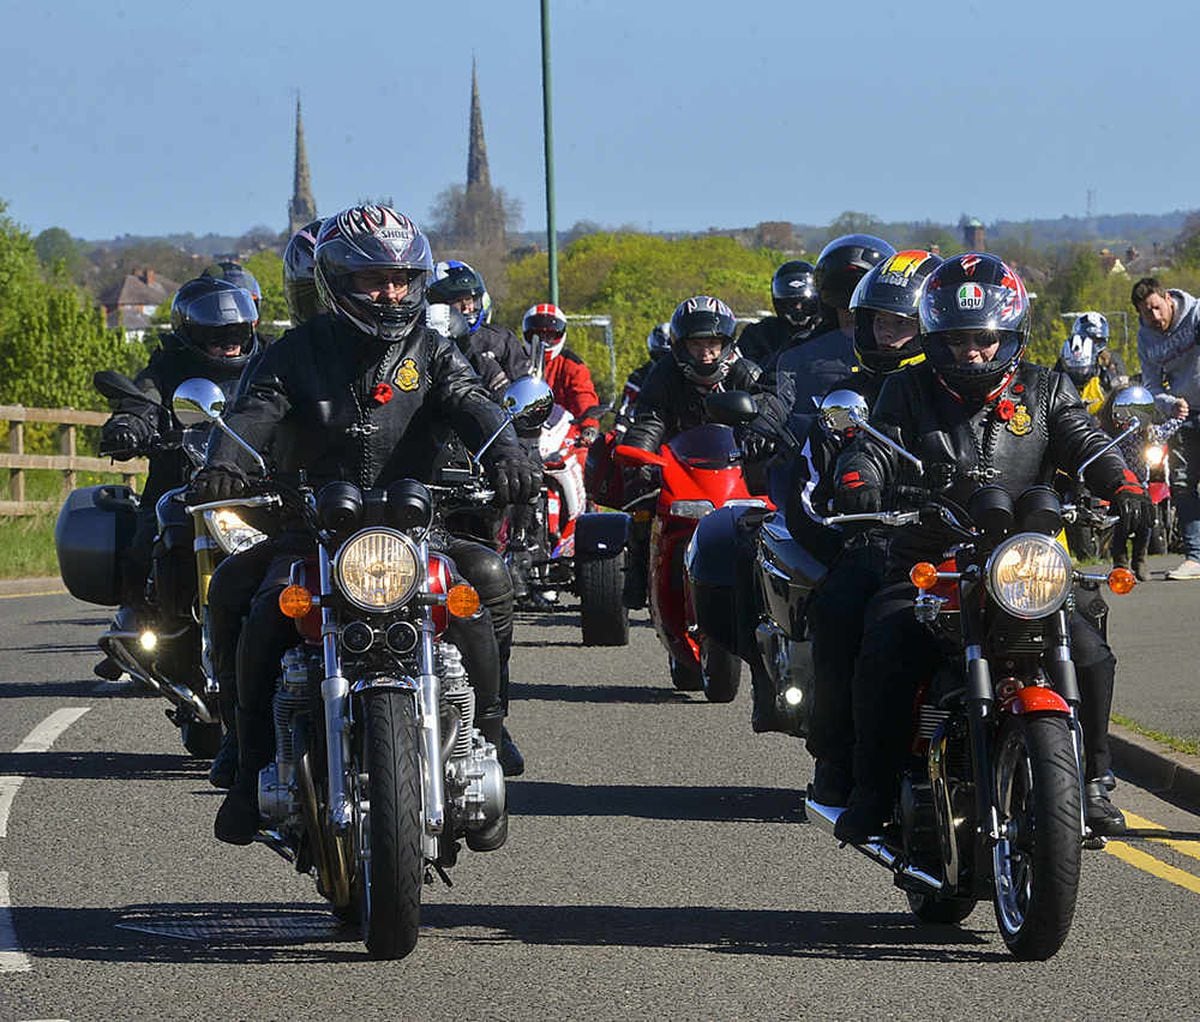 In Pictures 5 000 Bikers Attend Annual Bike4life Fest Shropshire Star